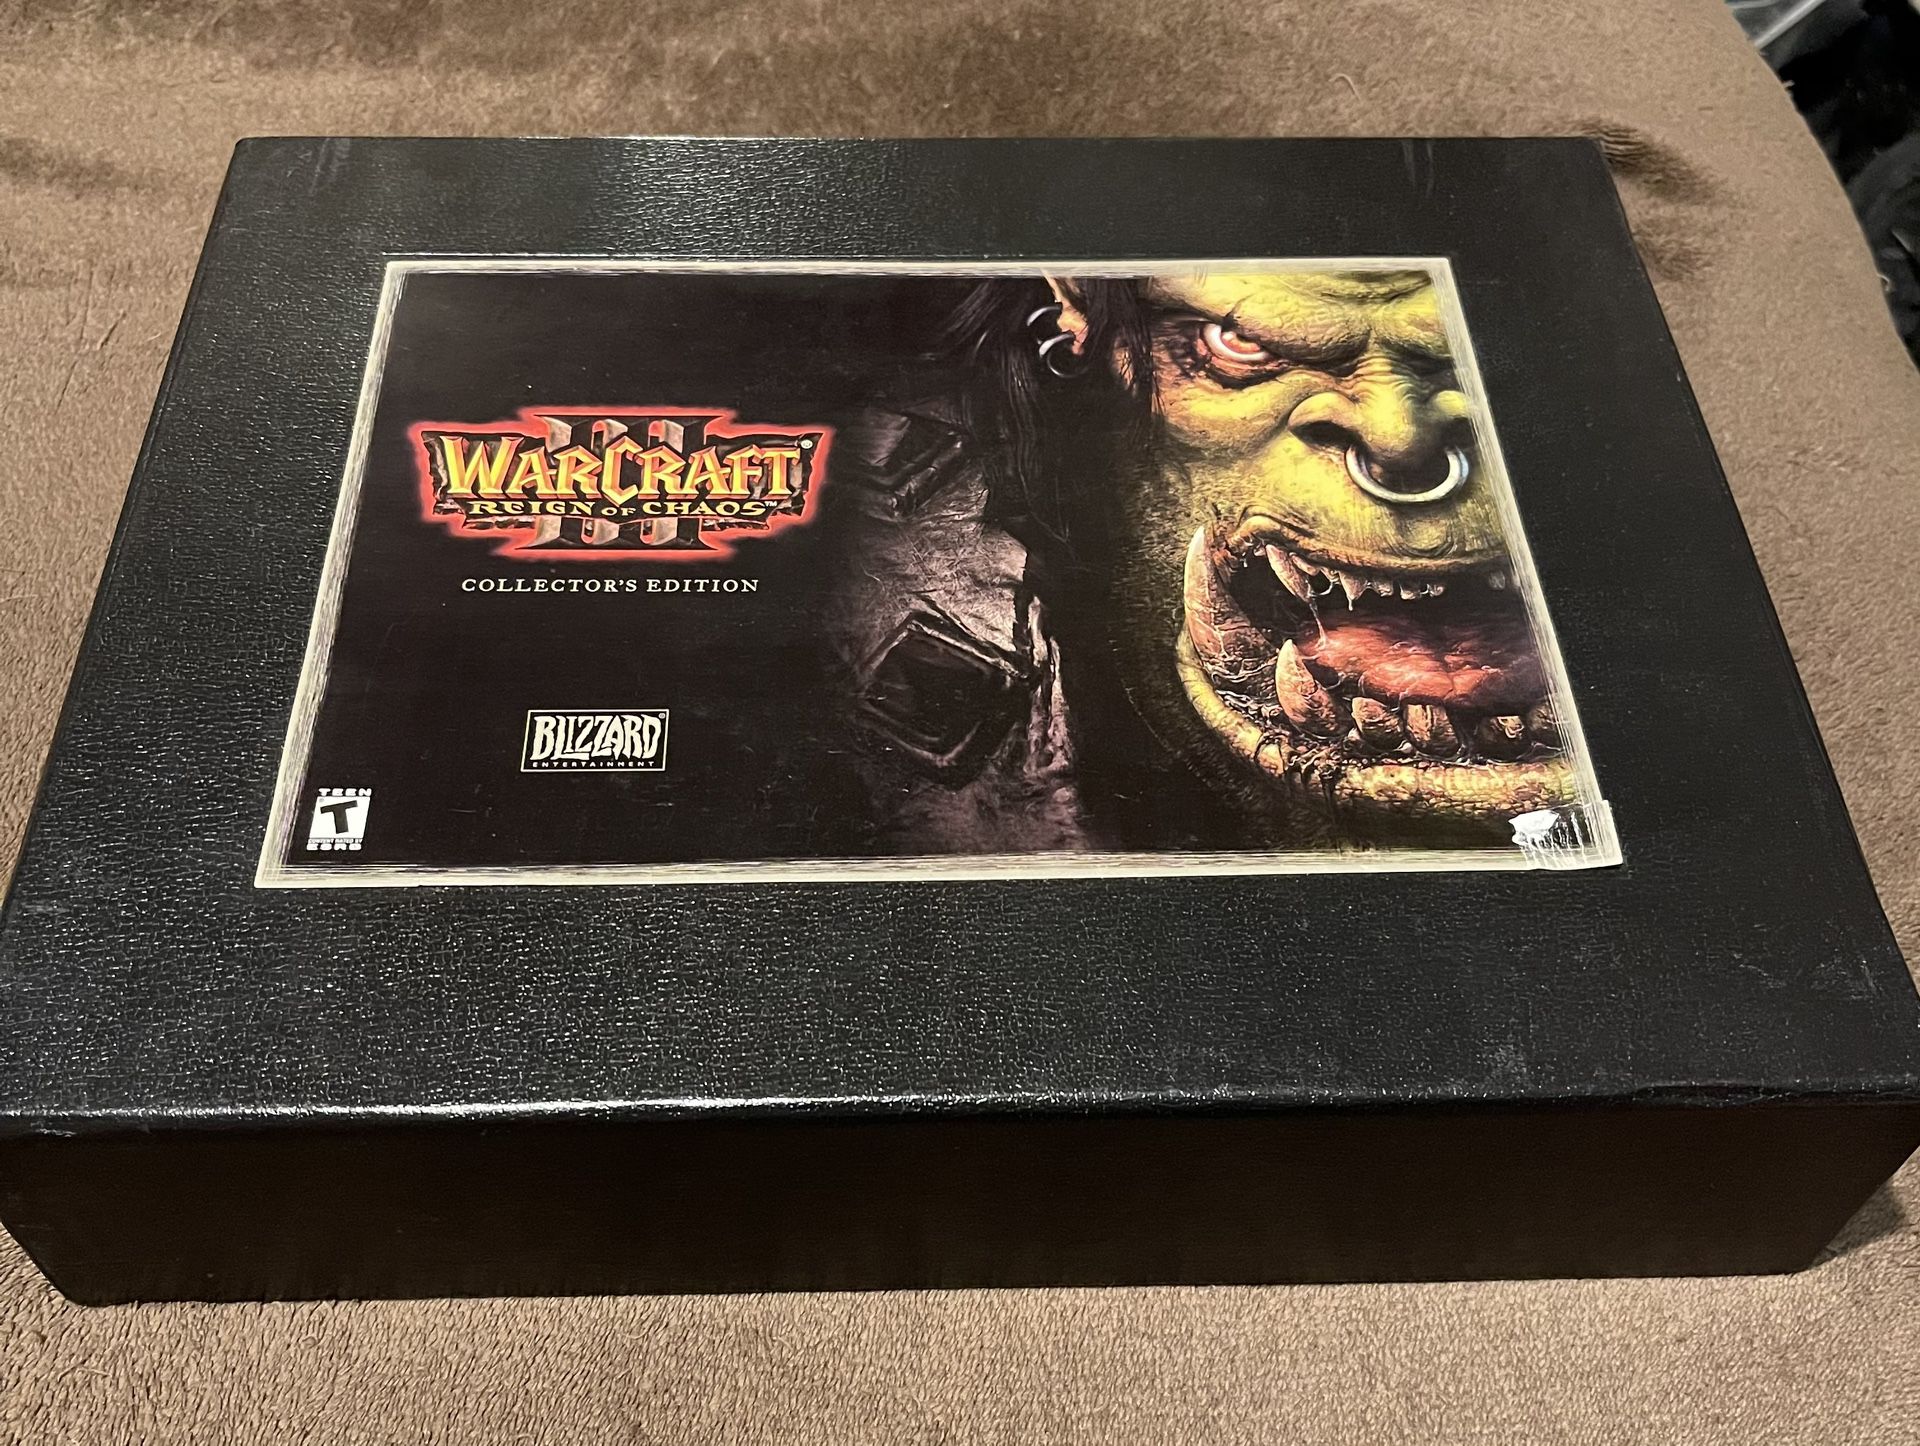 World Of Warcraft III Reign Of Chaos Collector’s Edition